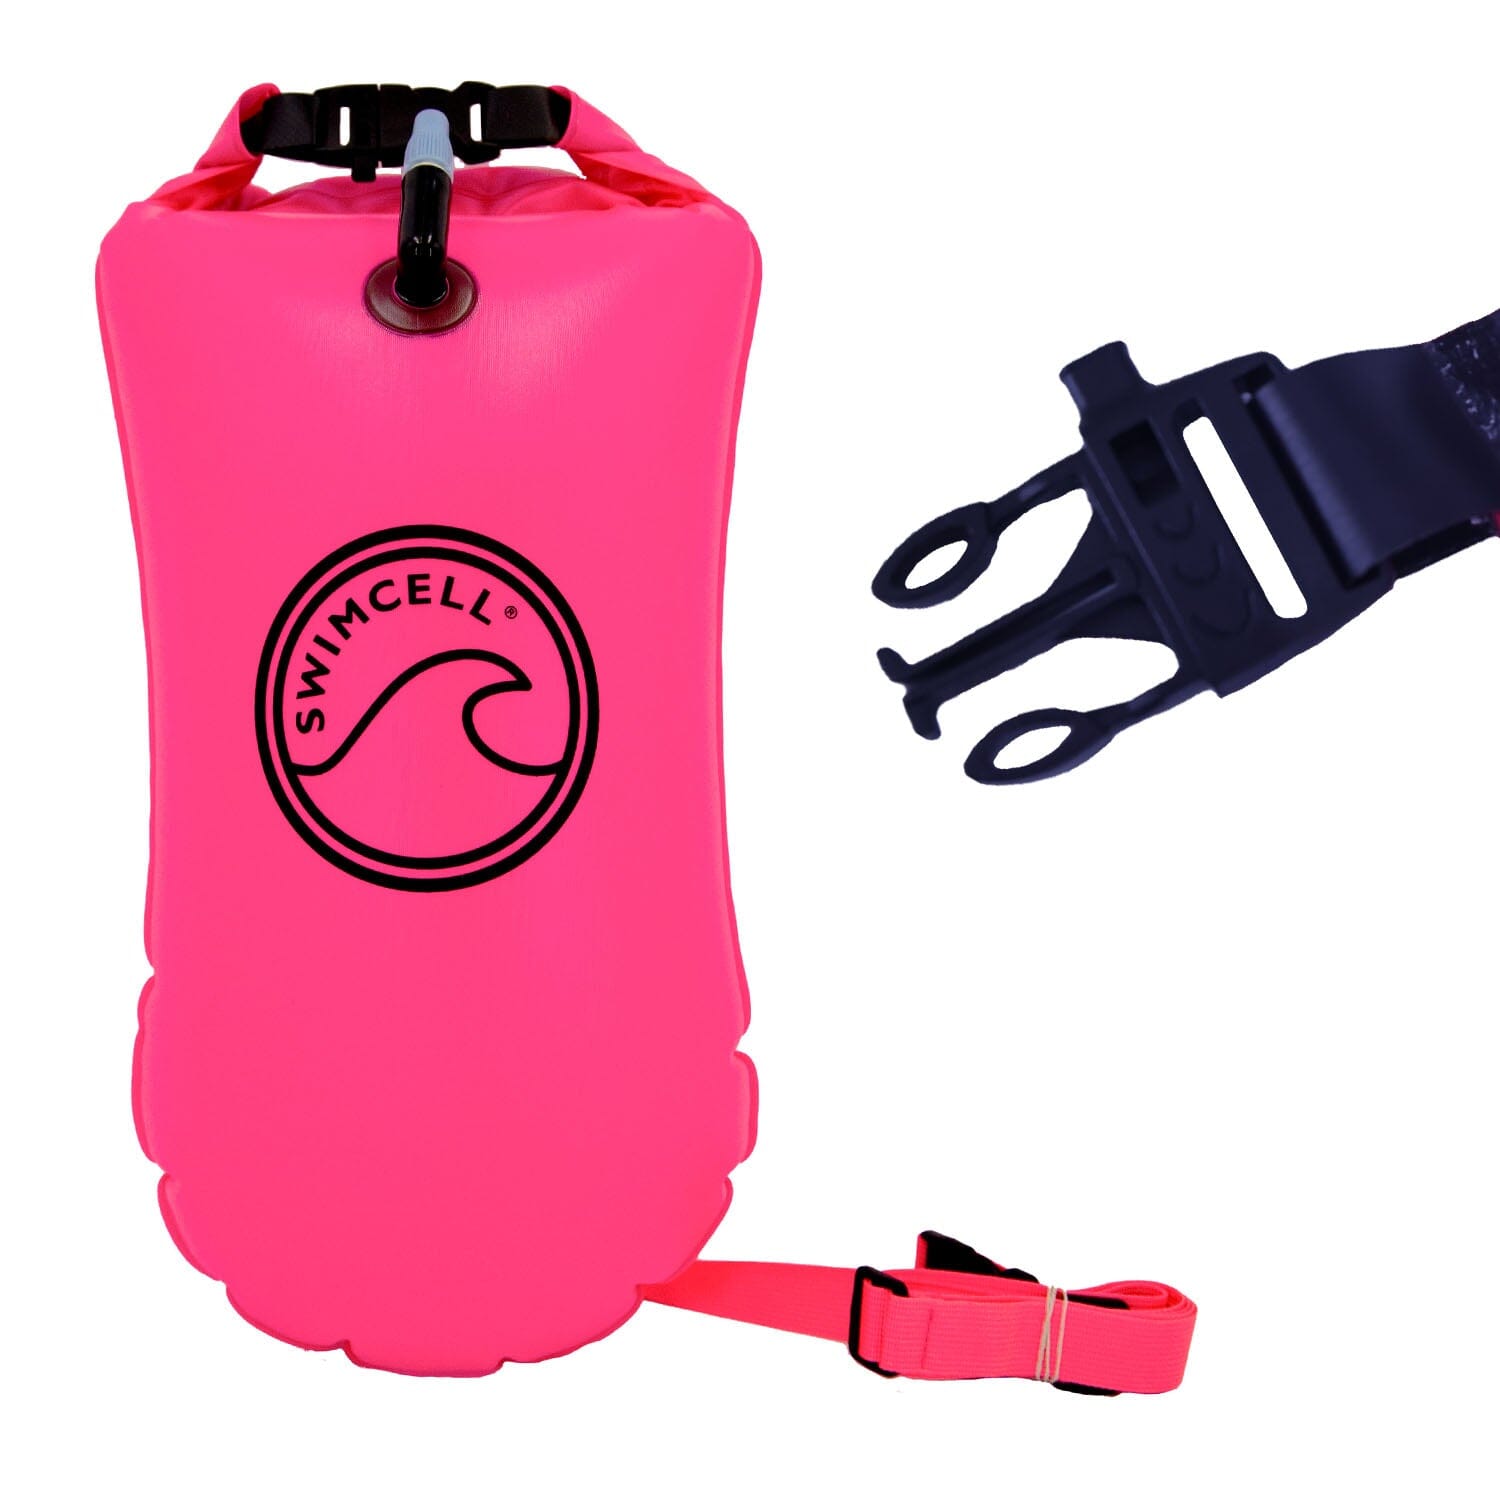 Pink tow float for swimming with emergency whislte